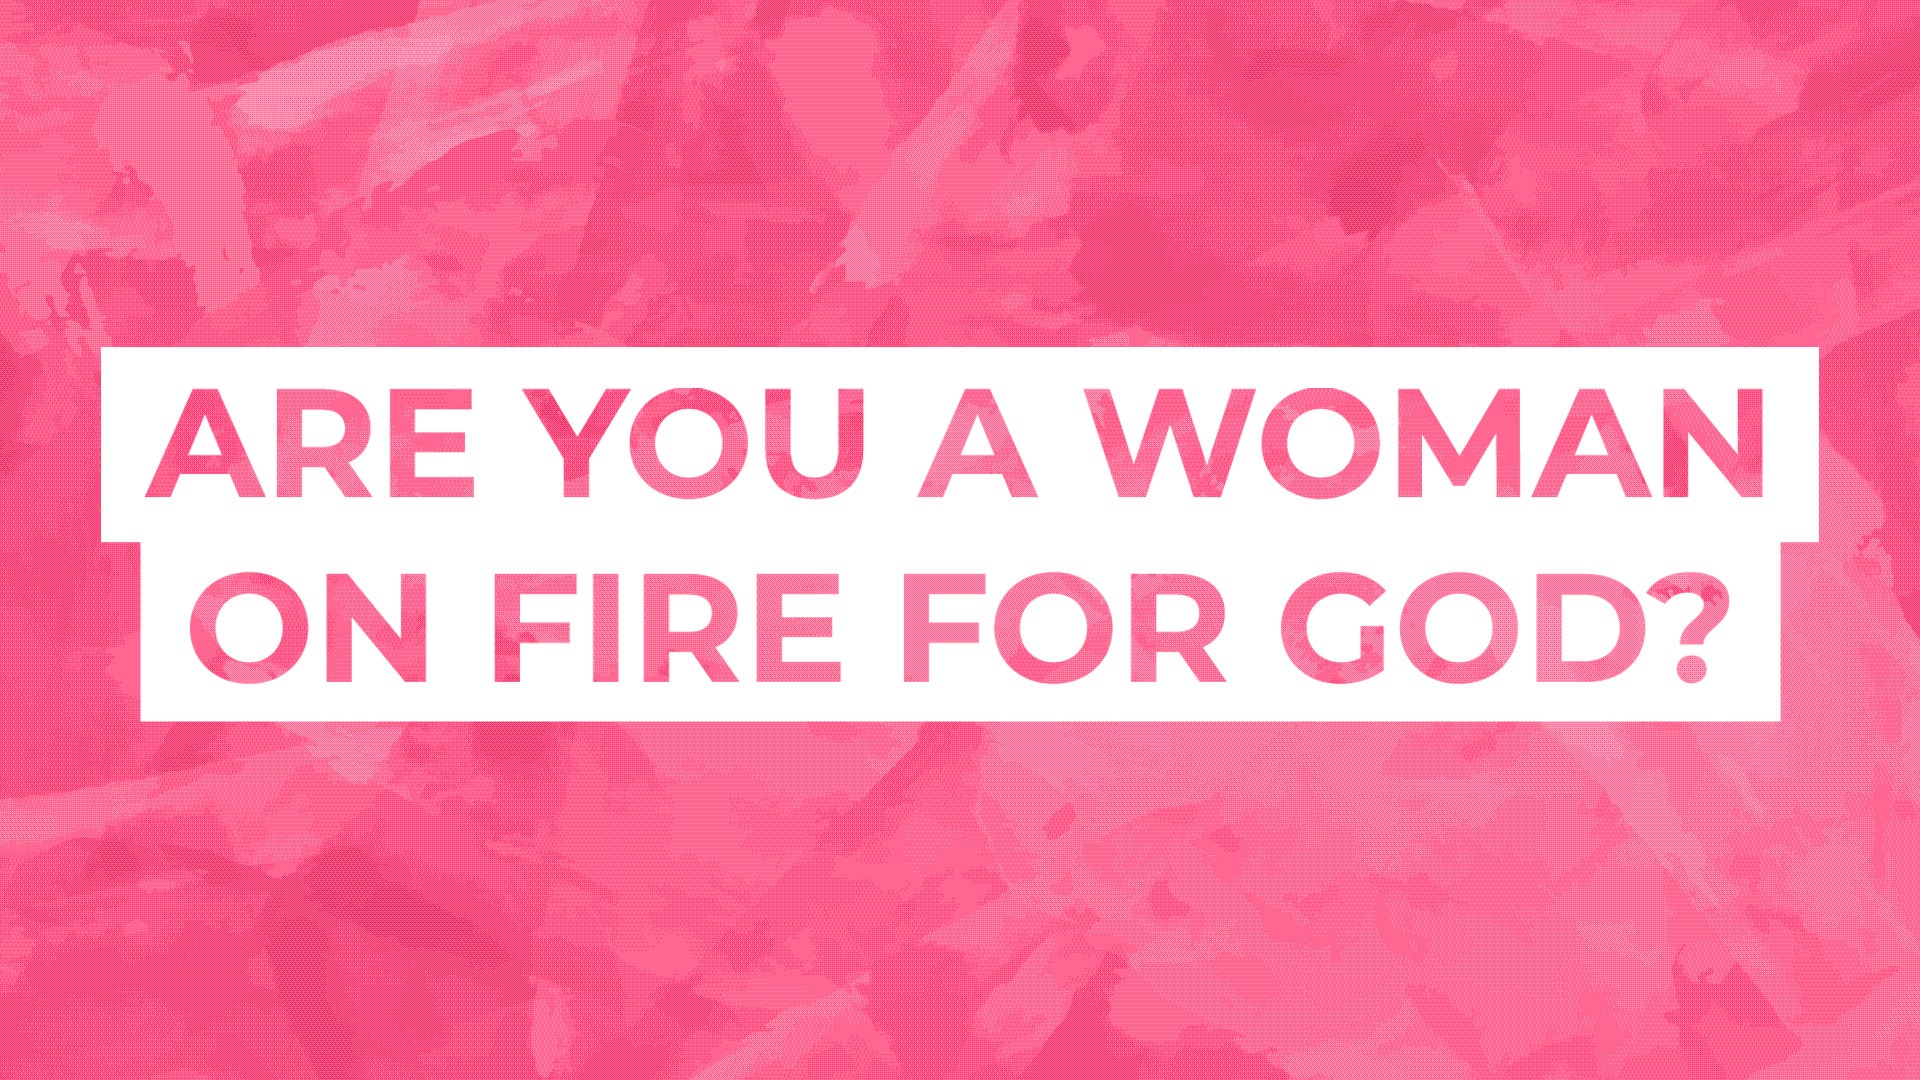 Are you a woman on fire for God?